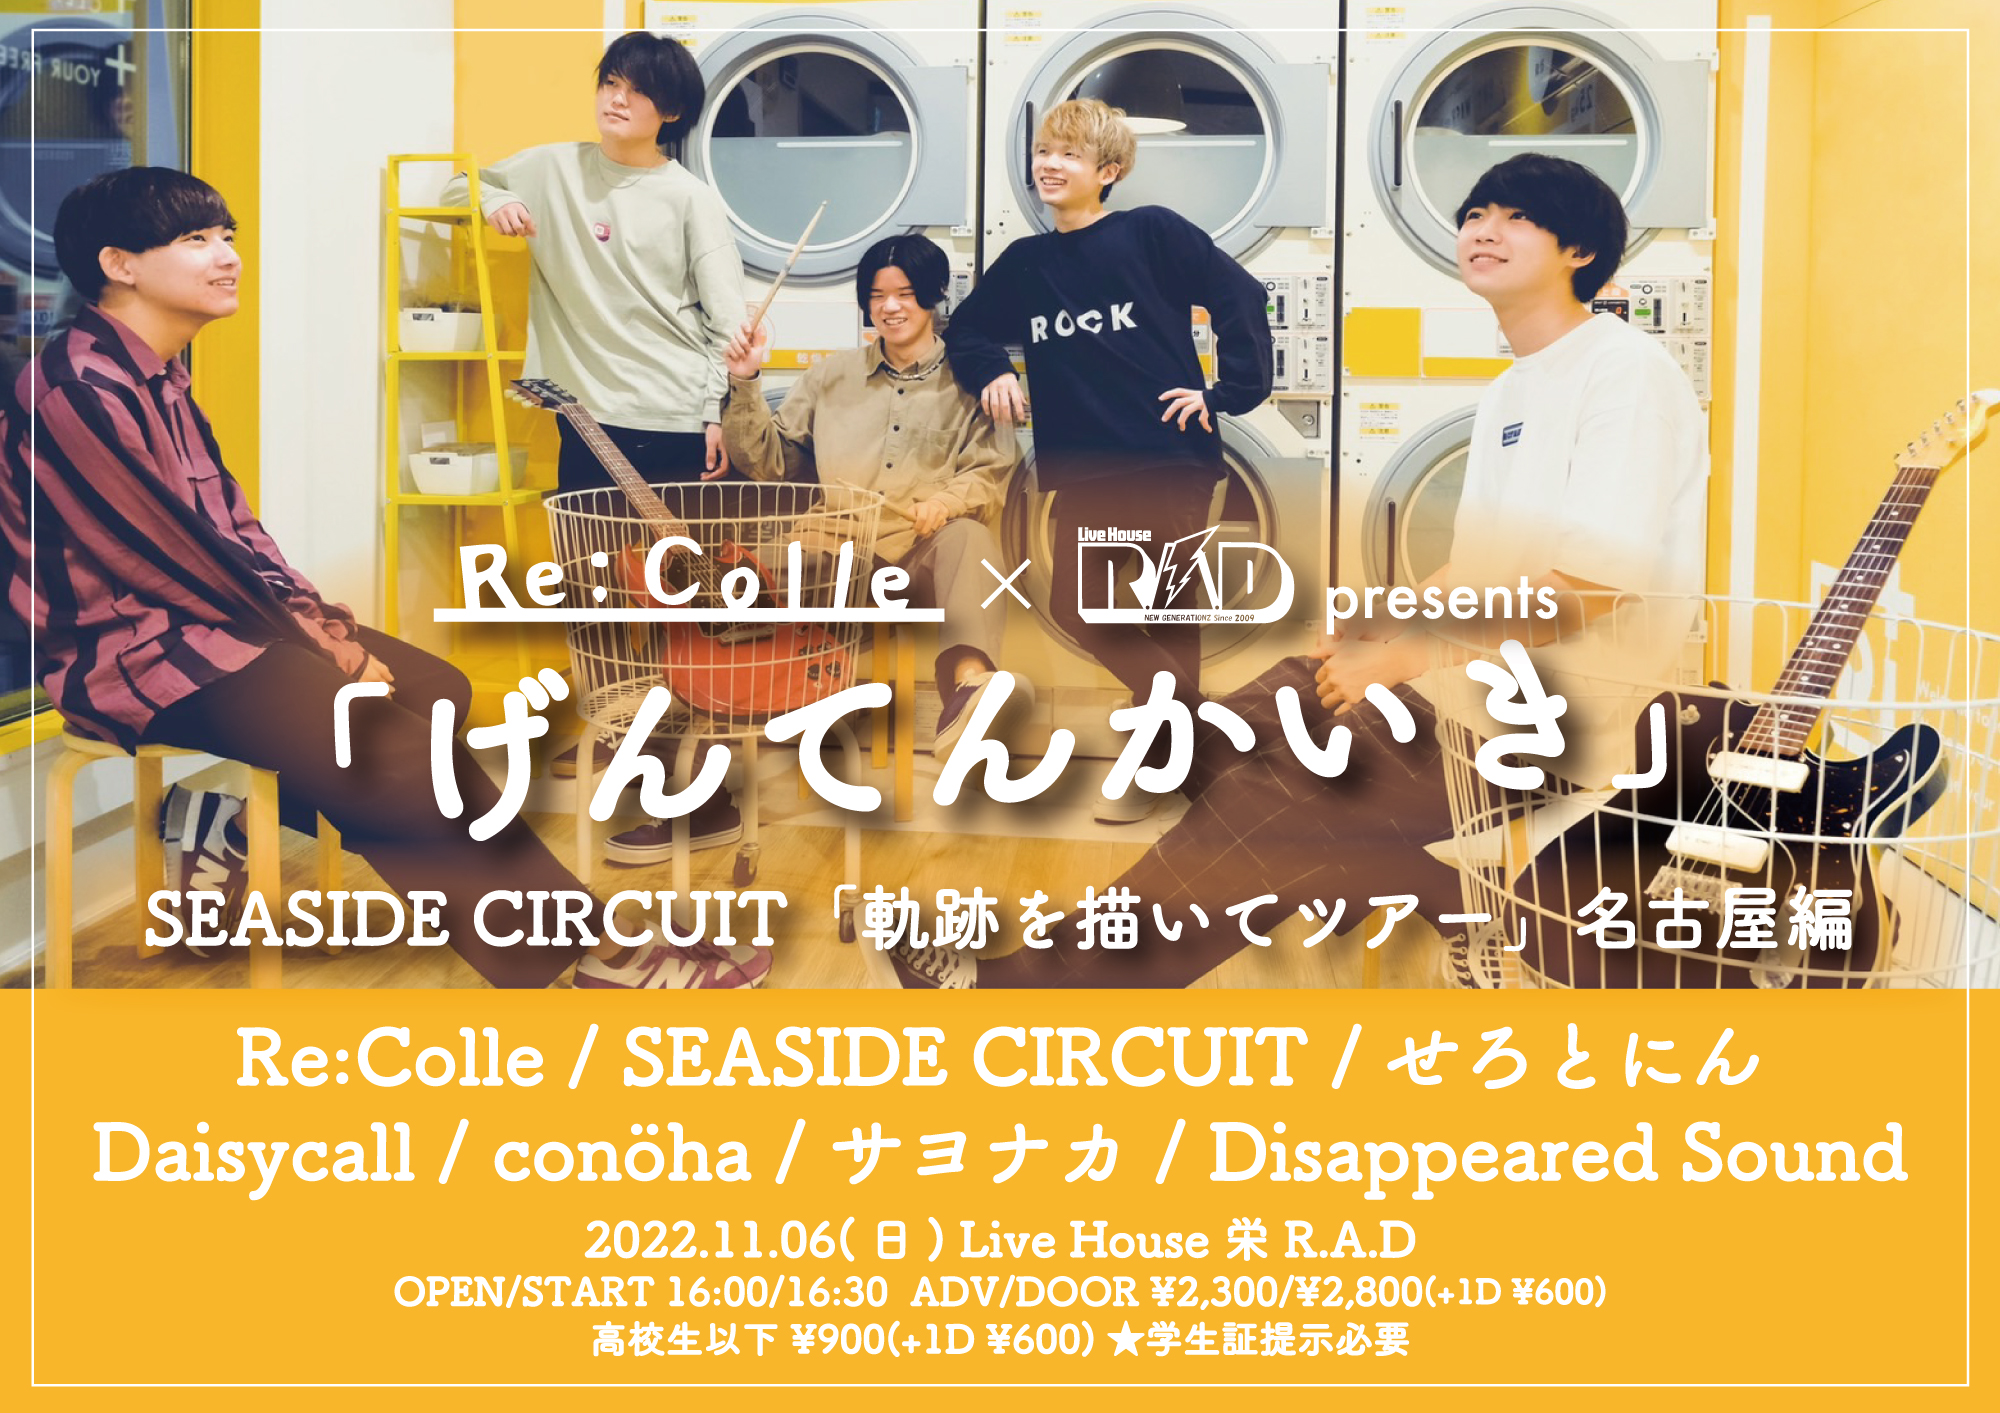 Re:Colle × R.A.D pre. 「げんてんかいき」 SEASIDE CIRCUIT「軌跡を描いてツアー」名古屋編